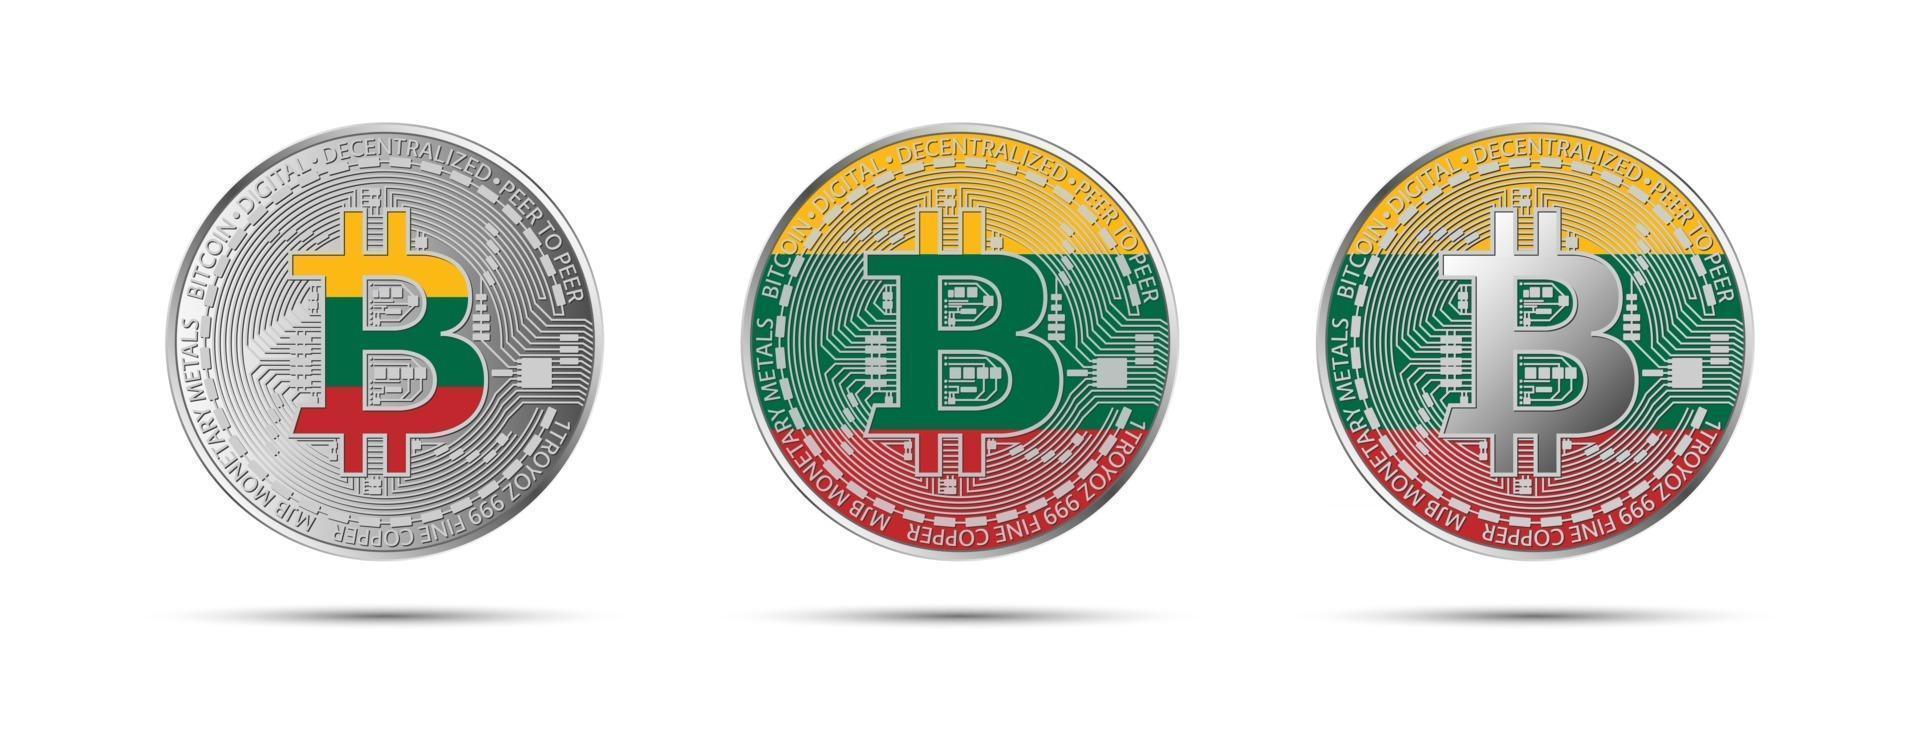 Three Bitcoin crypto coins with the flag of Lithuania Money of the future Modern cryptocurrency vector illustration